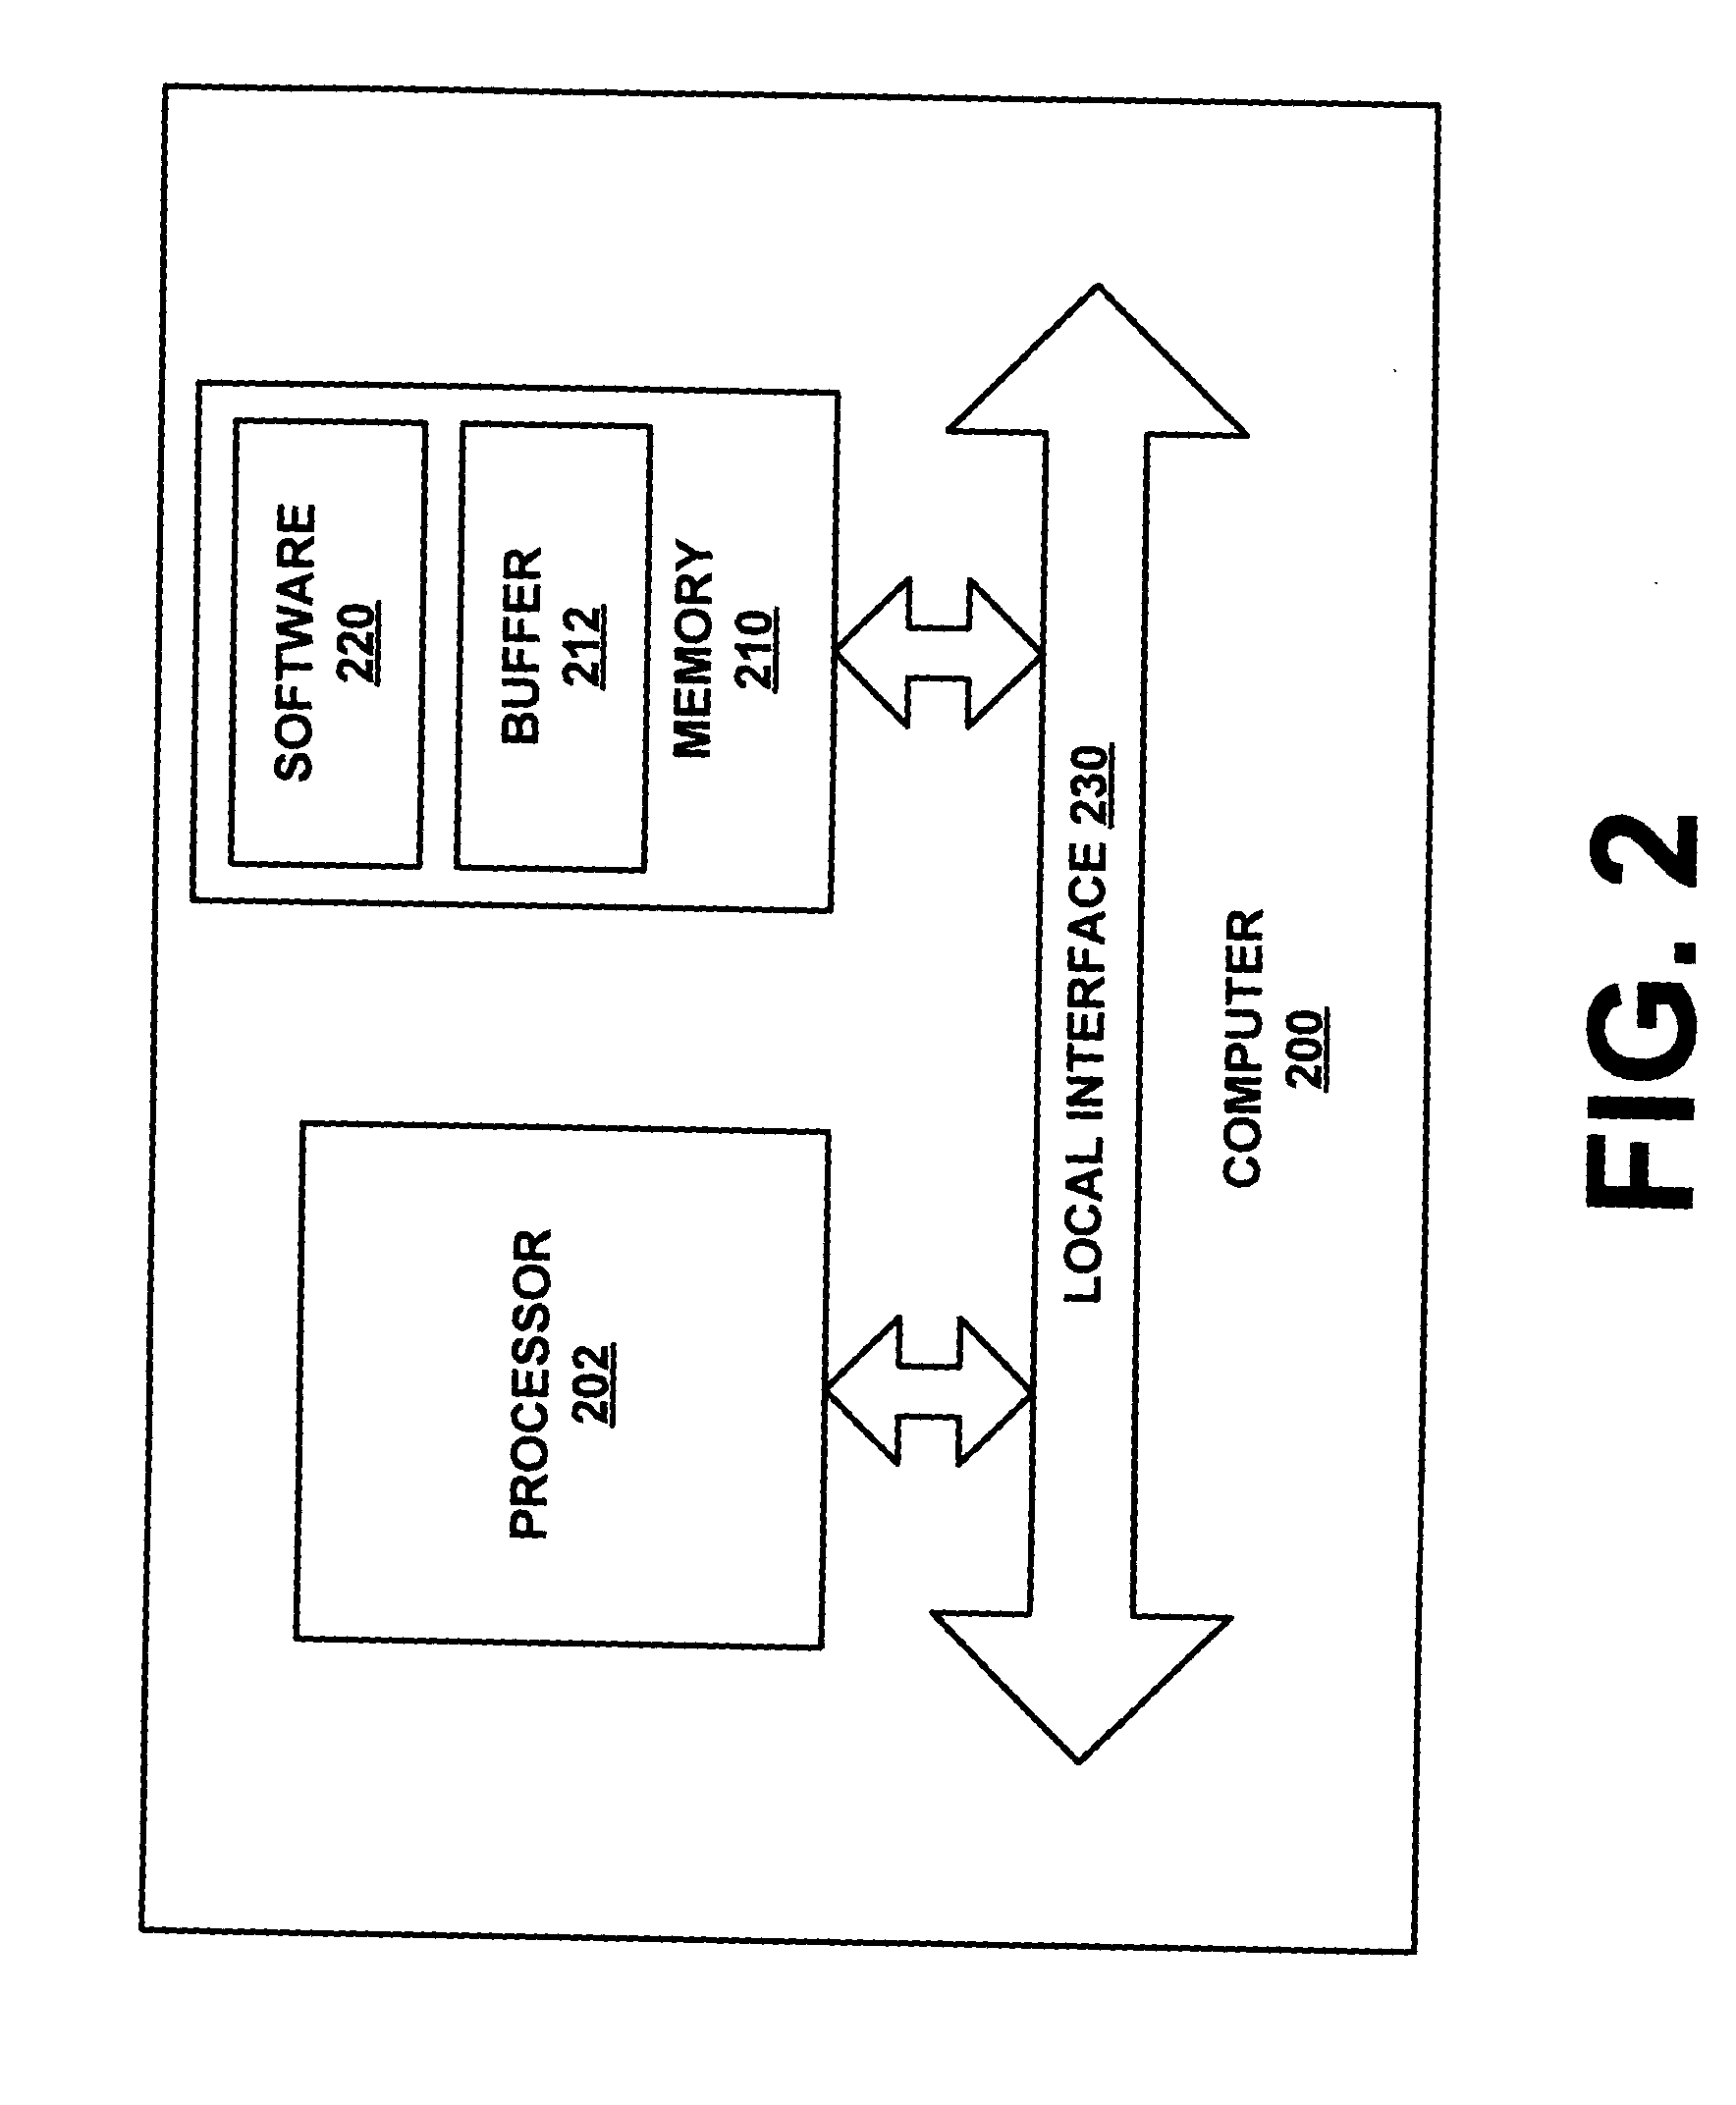 System and method for providing access to supplemental program services